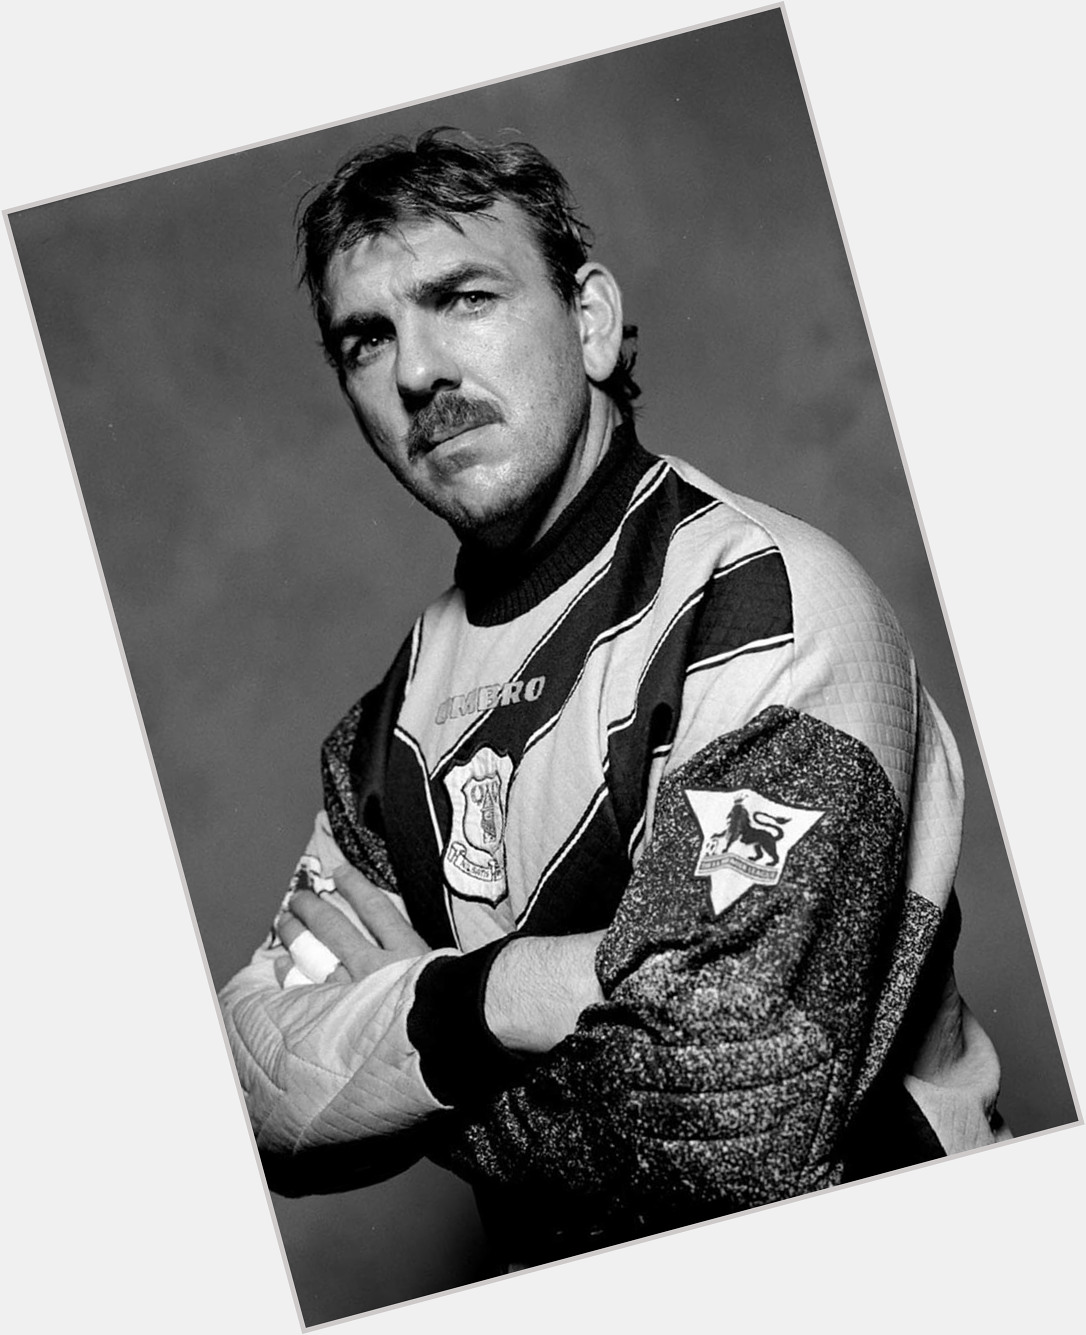   On this day in history, a legend was born.
Happy Birthday Neville Southall x   